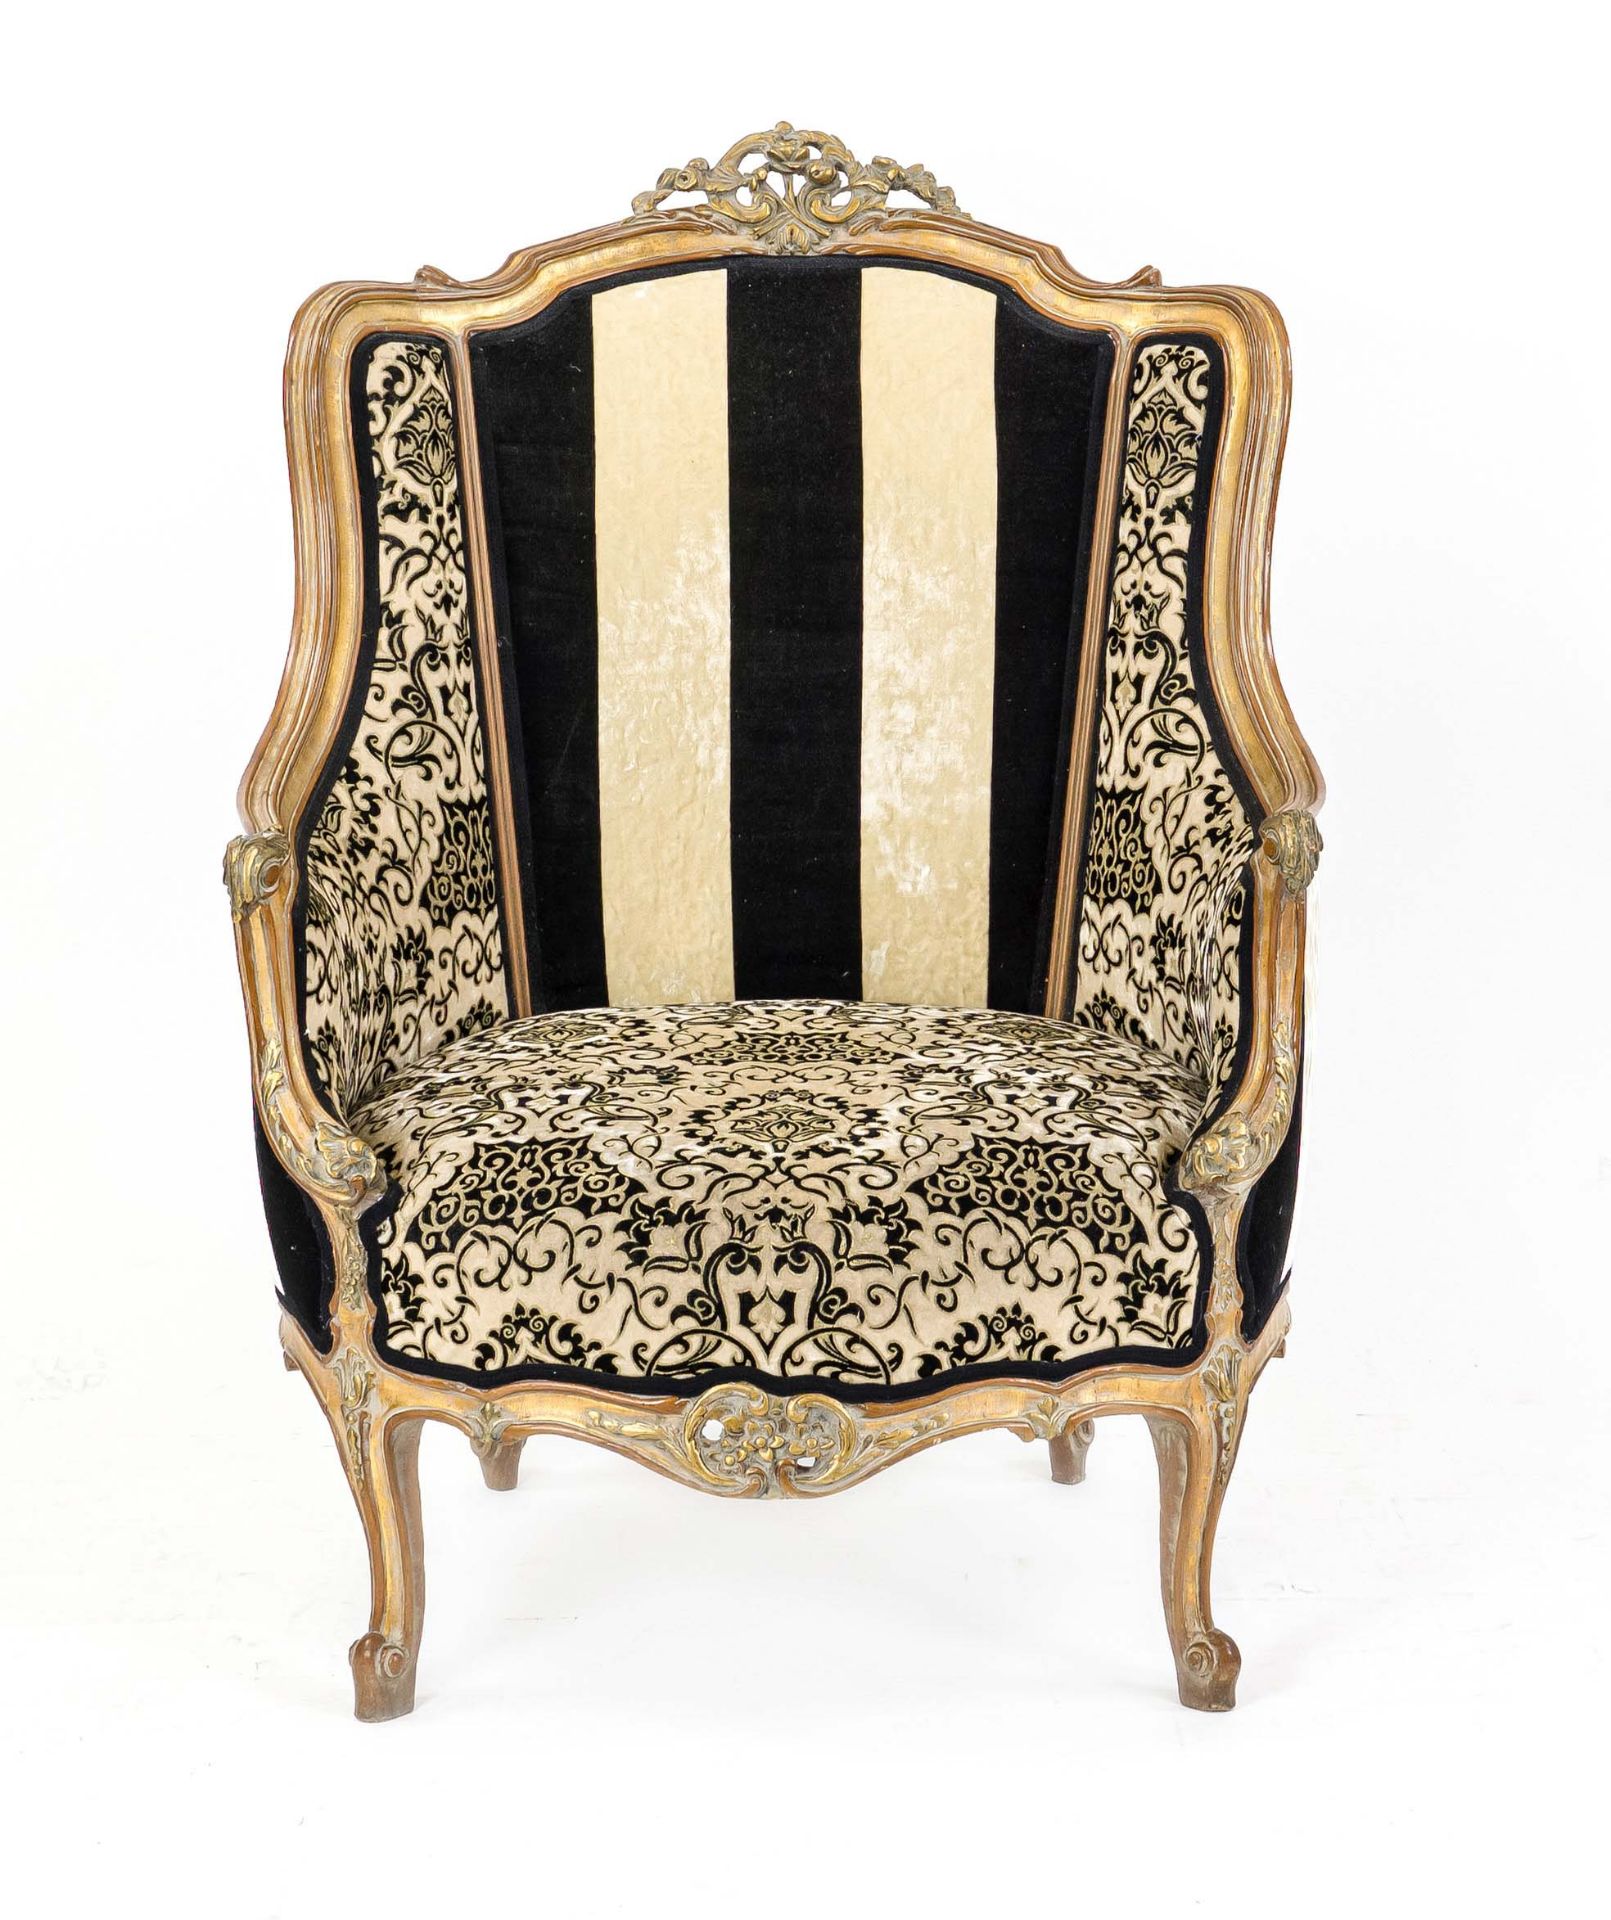 Bergere in the Louis Quinze style, 19th century, carved and gilded beech wood, backrest with - Image 2 of 3